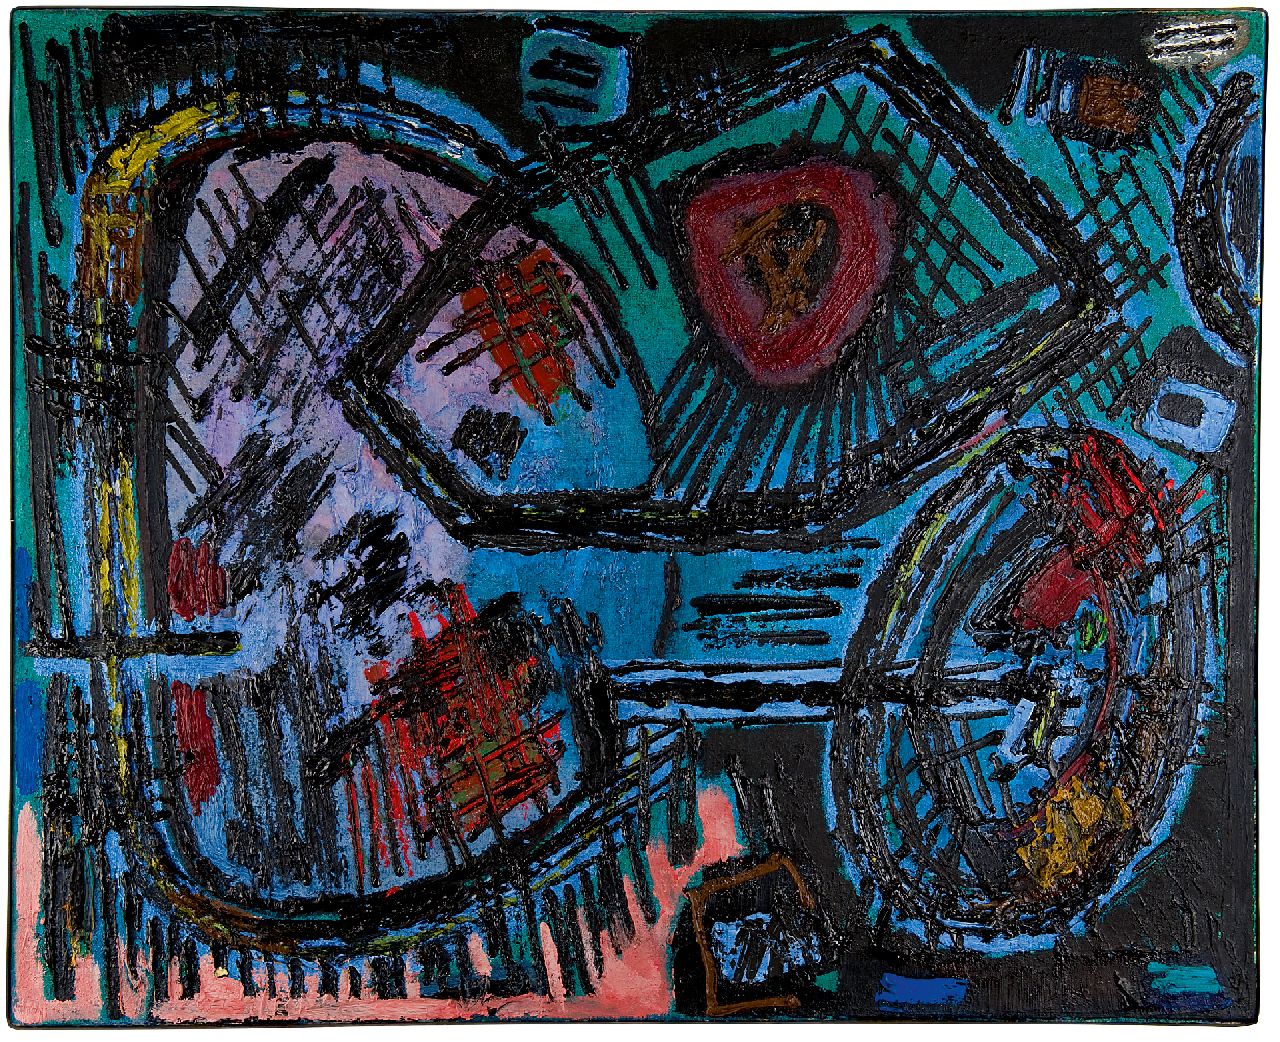 Hussem W.F.K.  | 'Willem' Frans Karel Hussem | Paintings offered for sale | Composition 1959, oil on canvas 80.4 x 100.2 cm, signed on the reverse and dated '59 on the reverse